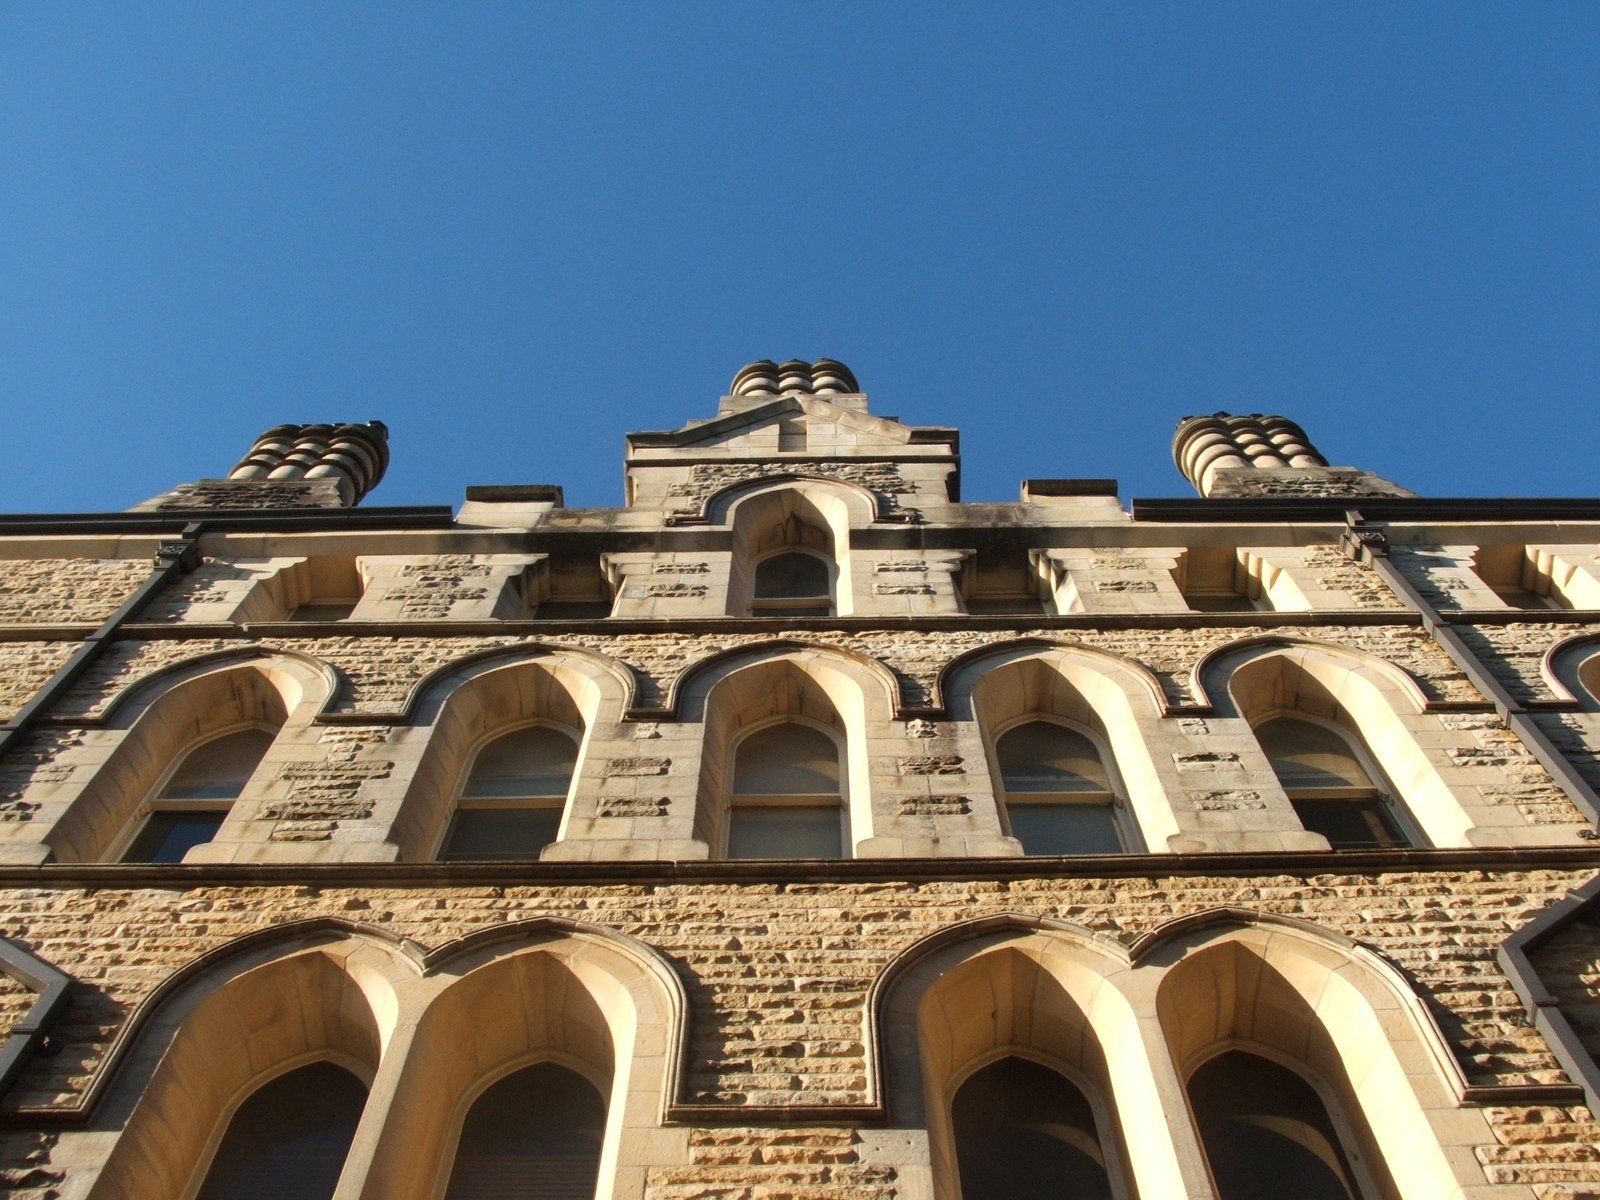 the tower of an old brick building with arched windows